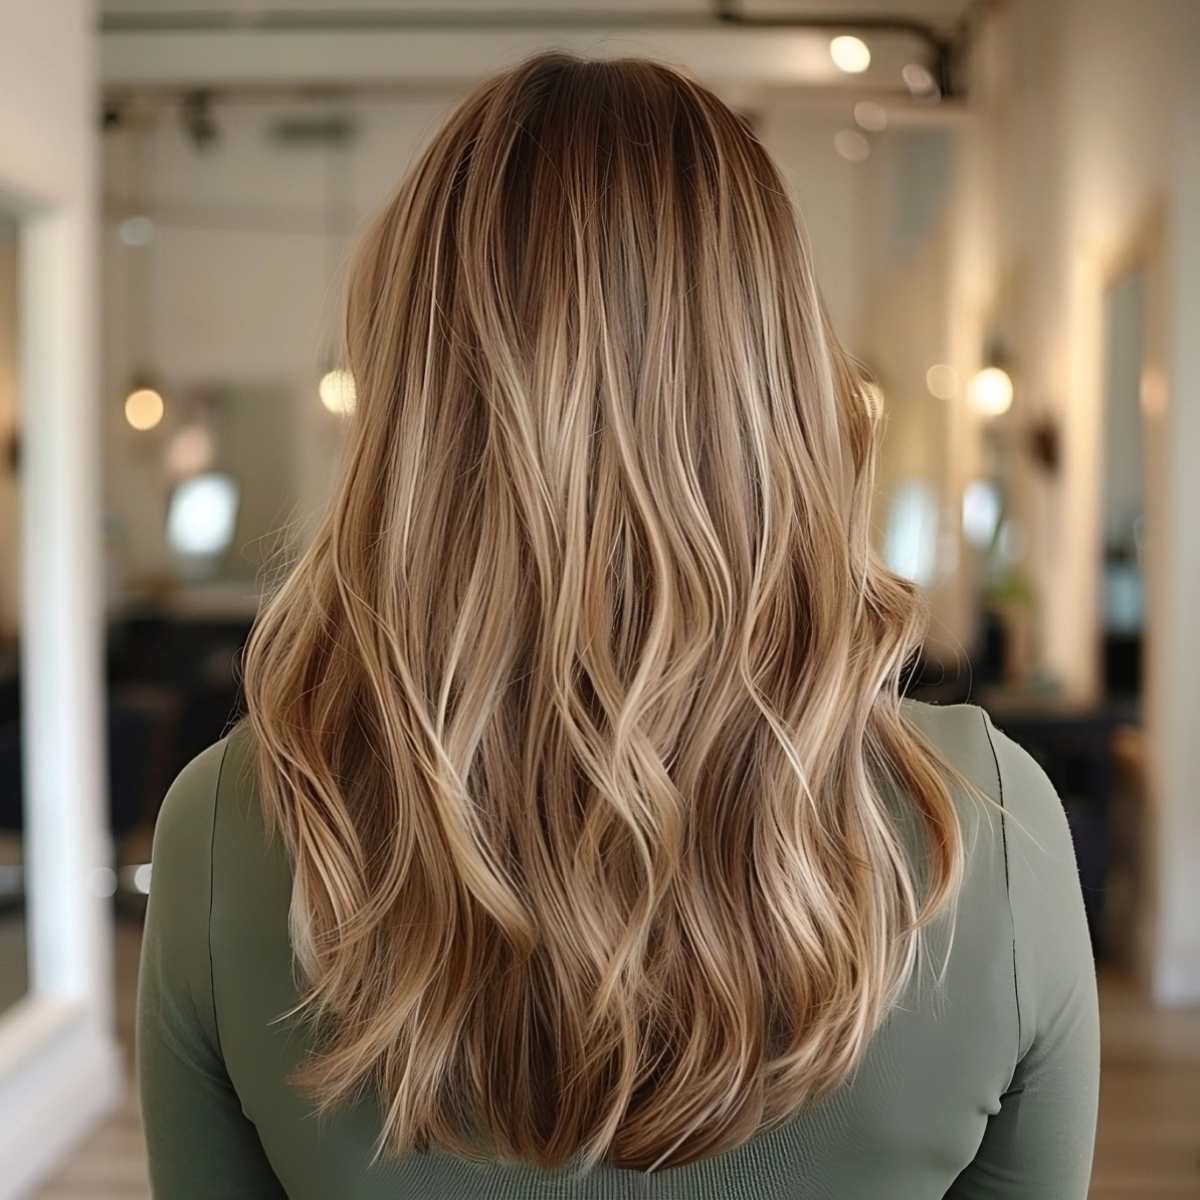 blunt cut long hair with mid-point layers